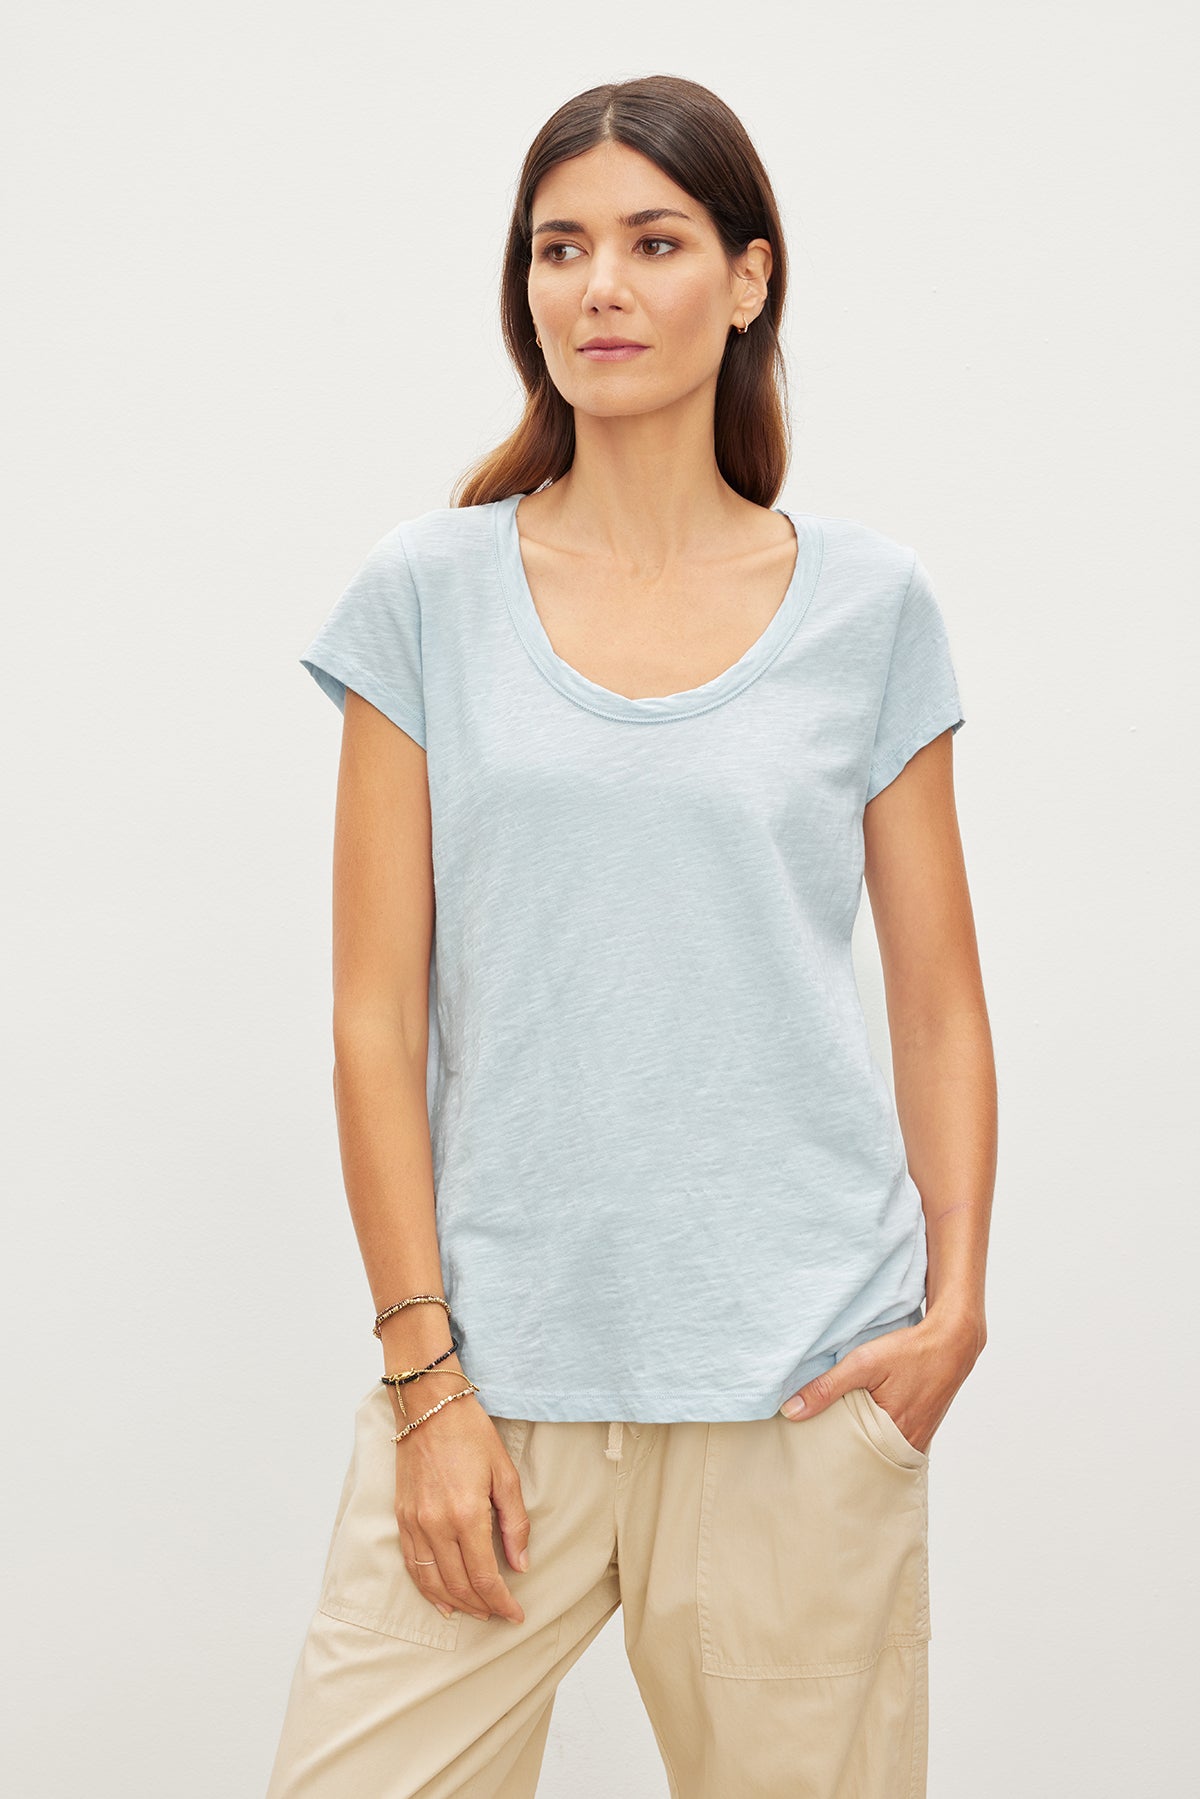   Woman in a light blue KIRA ORIGINAL SLUB SCOOP NECK TEE by Velvet by Graham & Spencer with vintage-cropped sleeves and scoop neck, paired with beige pants, standing against a plain background, looking slightly to the side. 